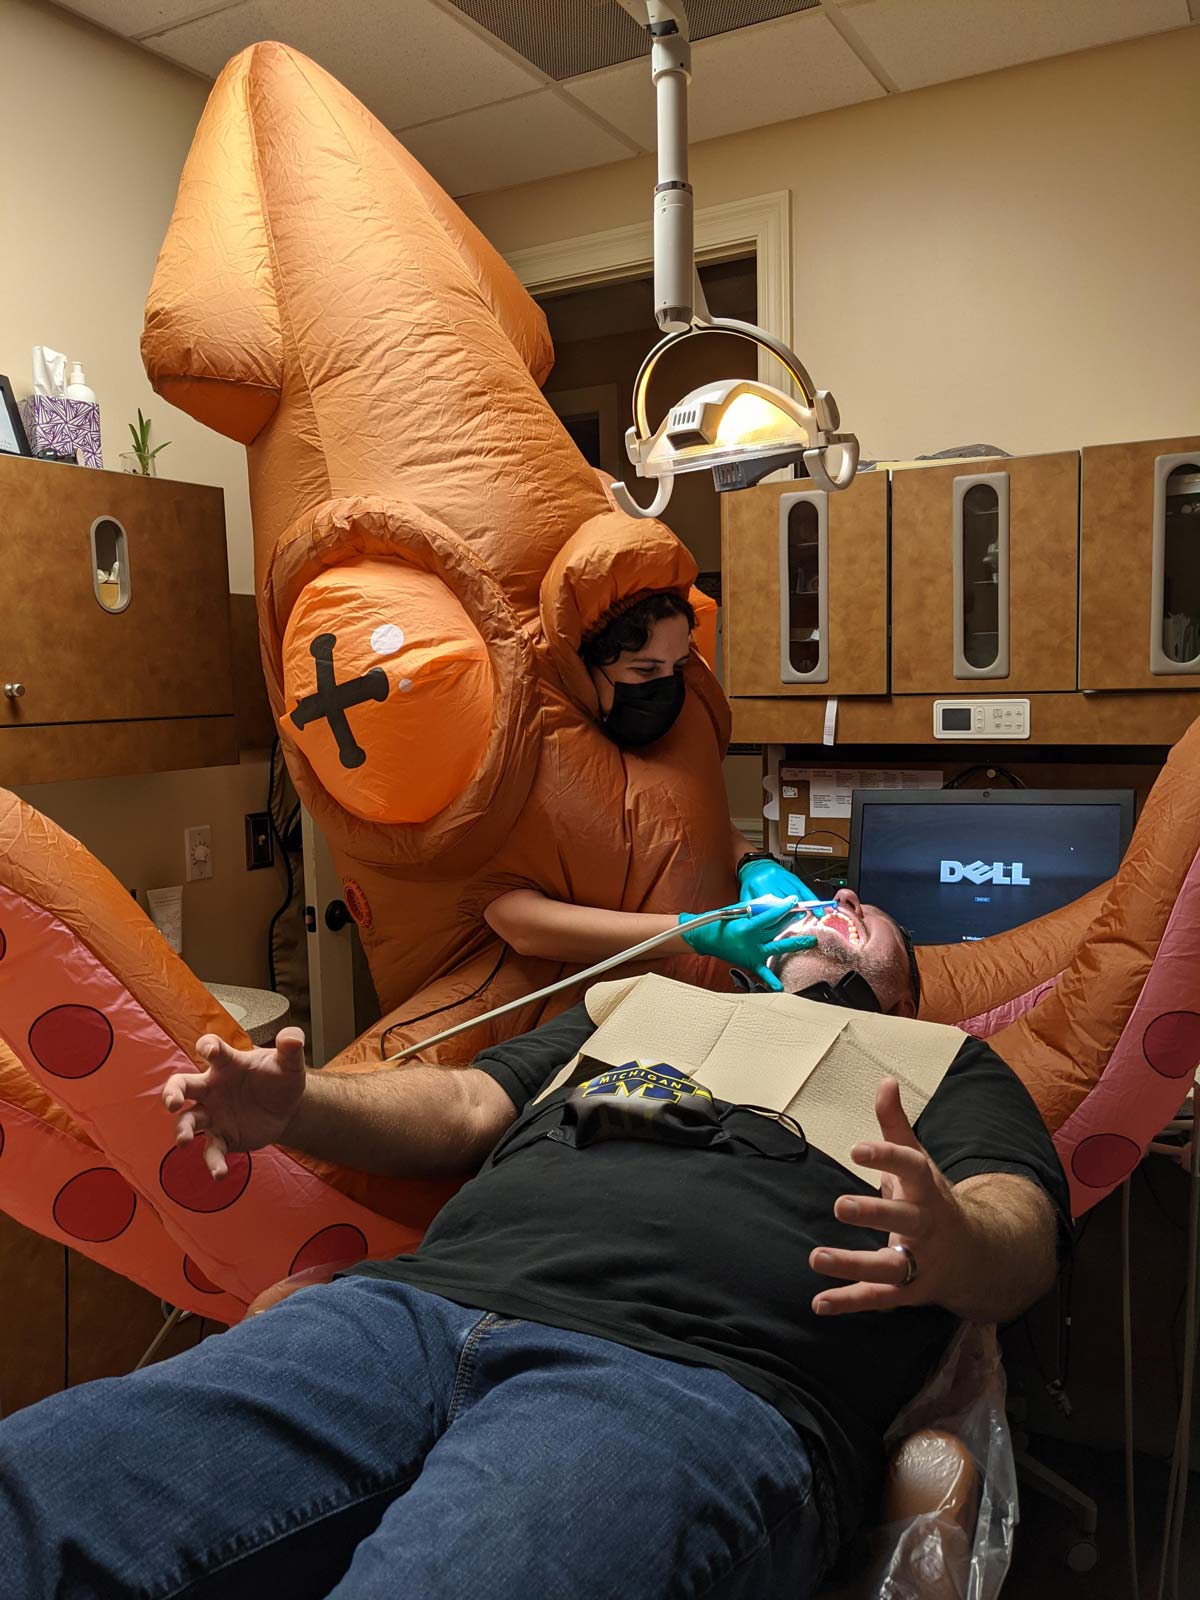 Just a normal day at the dentist